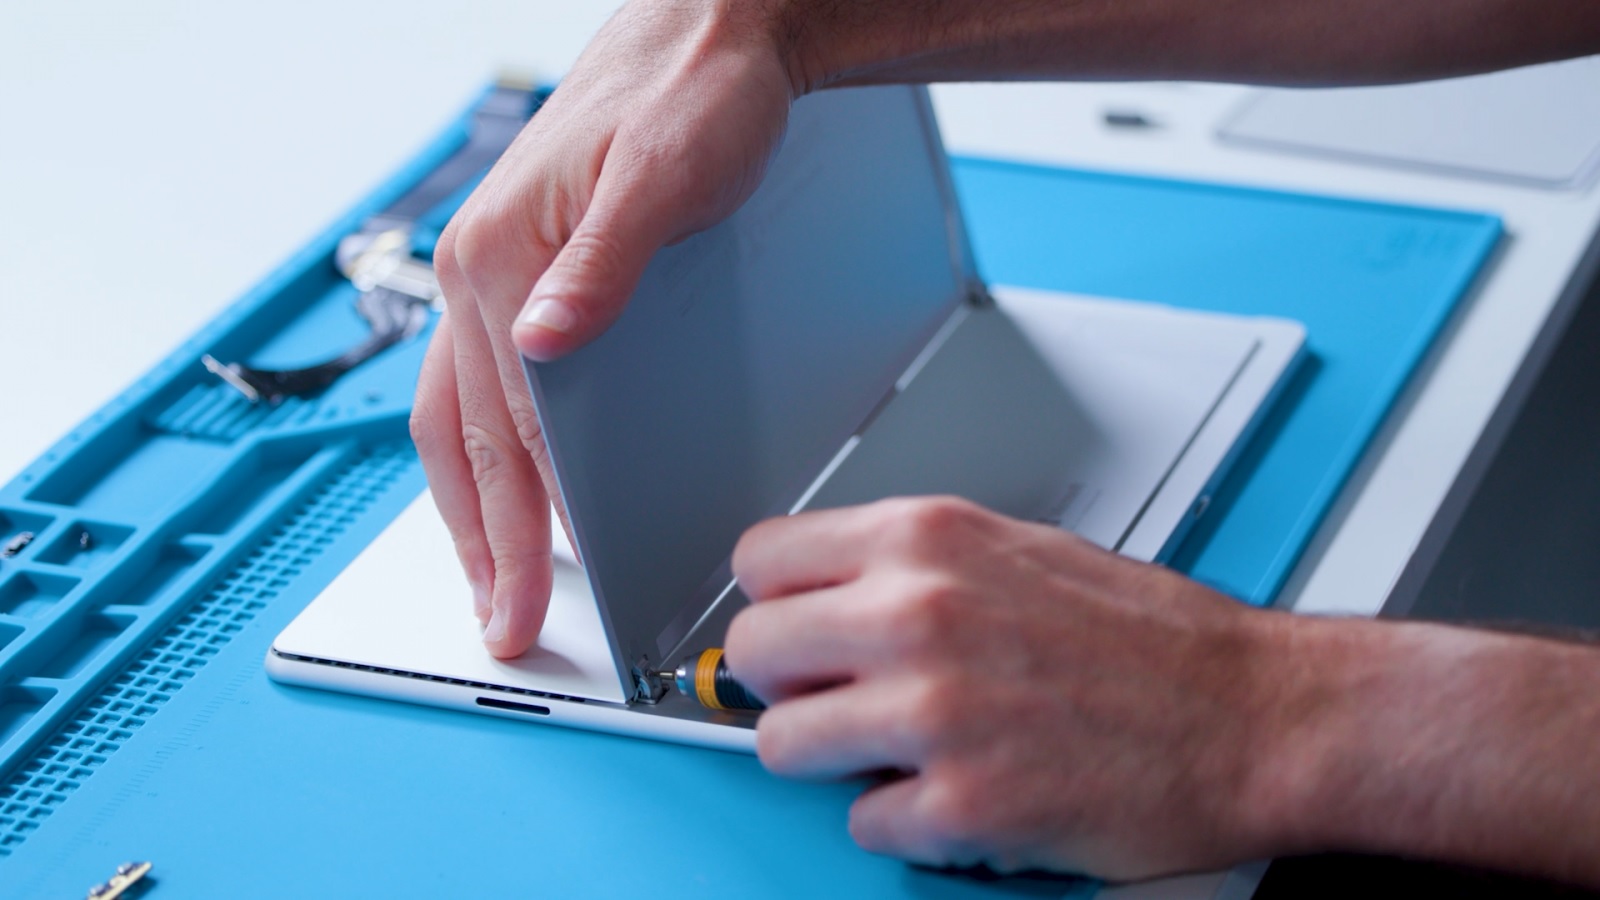 Microsoft opens up to do-it-yourself Surface repairs: now you can buy replacement parts